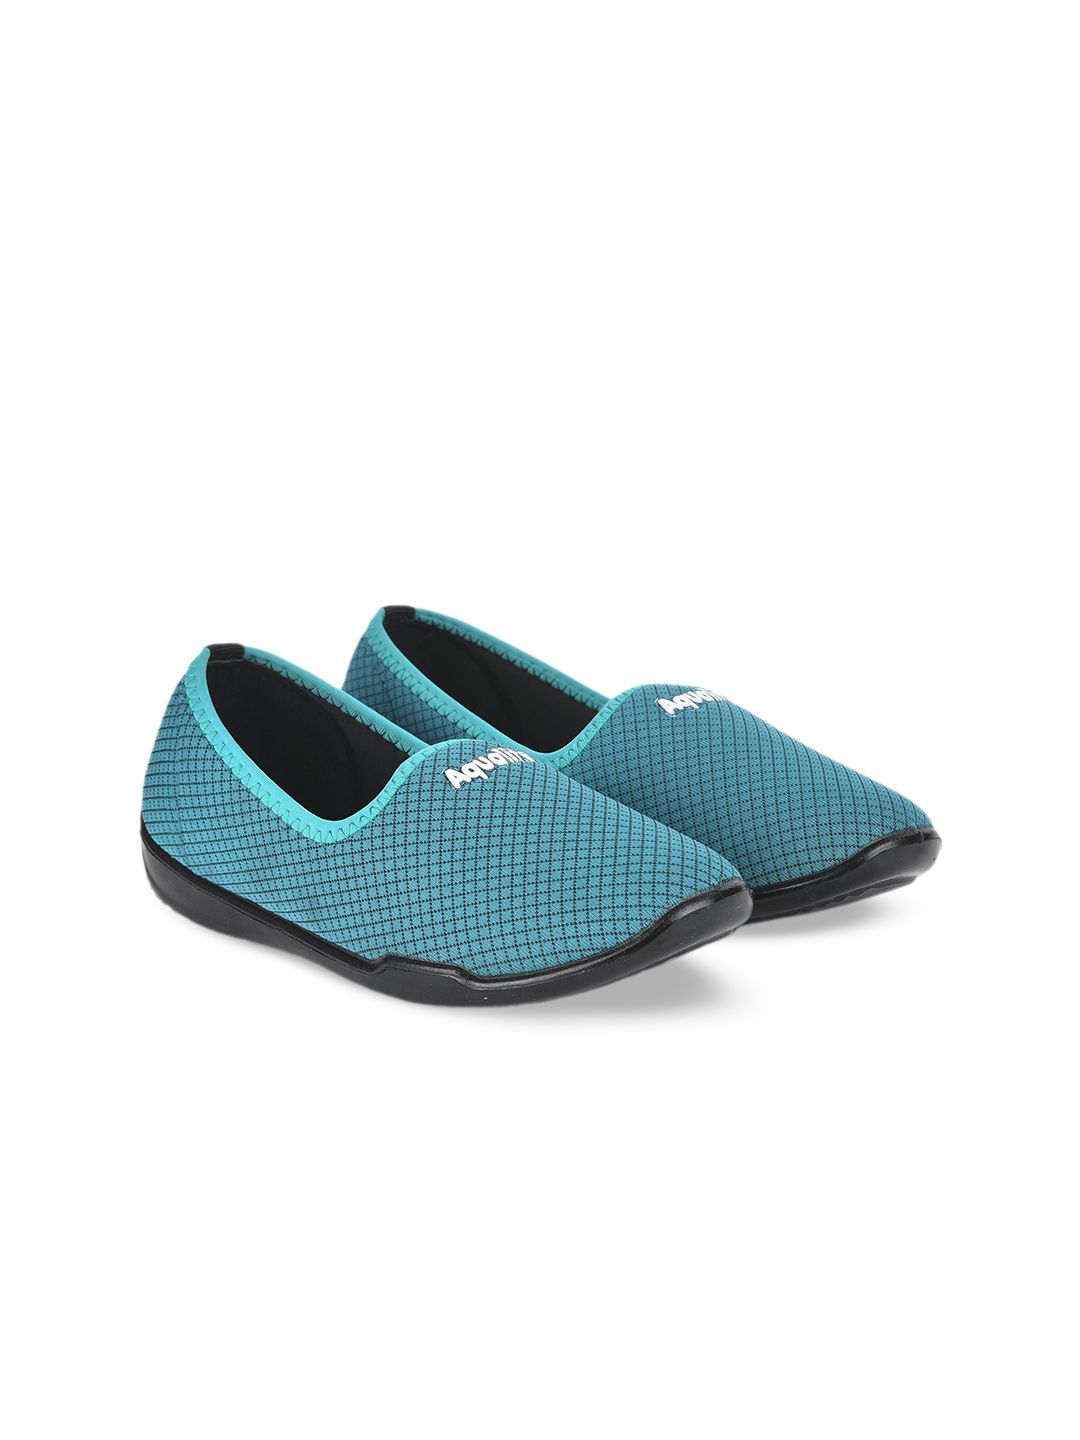 Aqualite Women Blue Woven Design Slip-On Sneakers Price in India